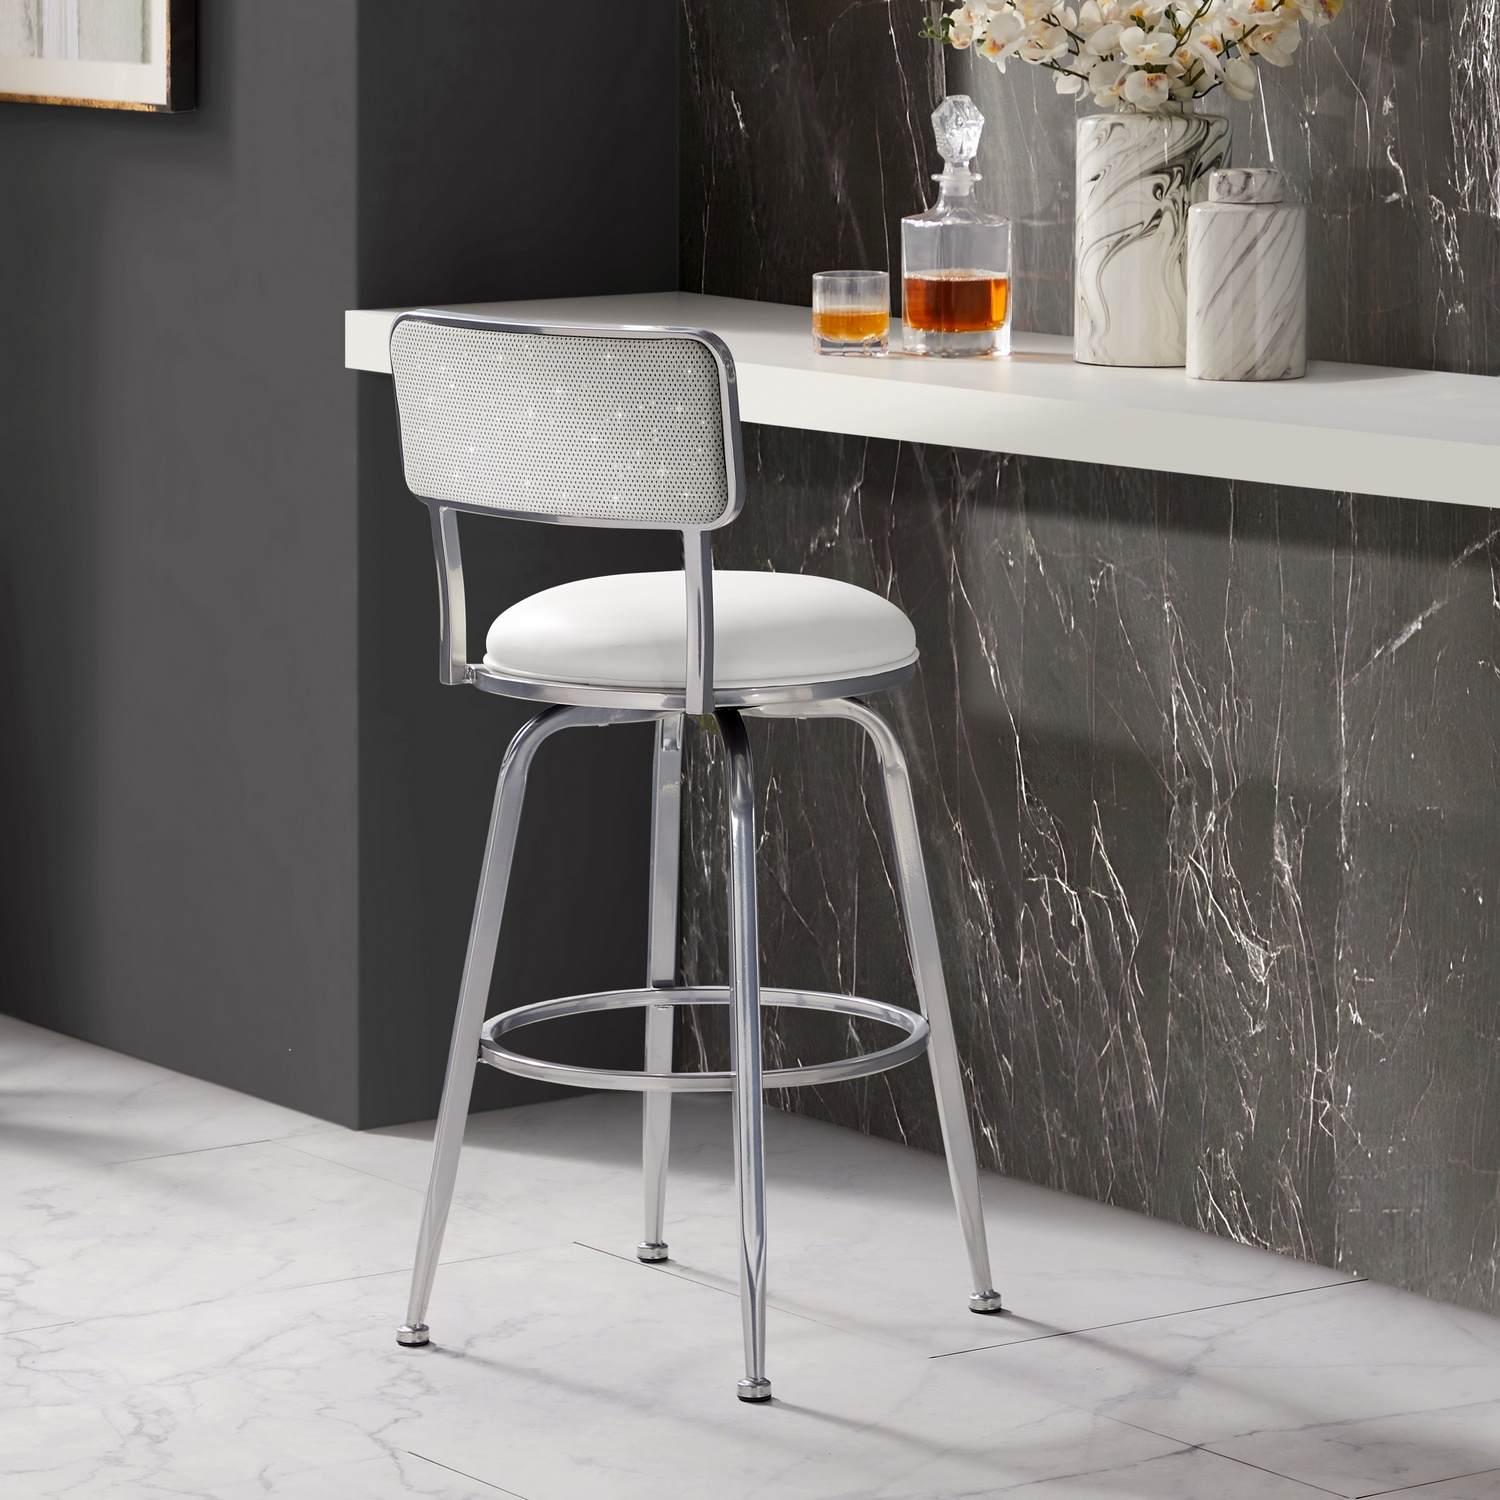 Hillsdale Baltimore Metal and Upholstered Swivel Bar Height Stool - Chrome